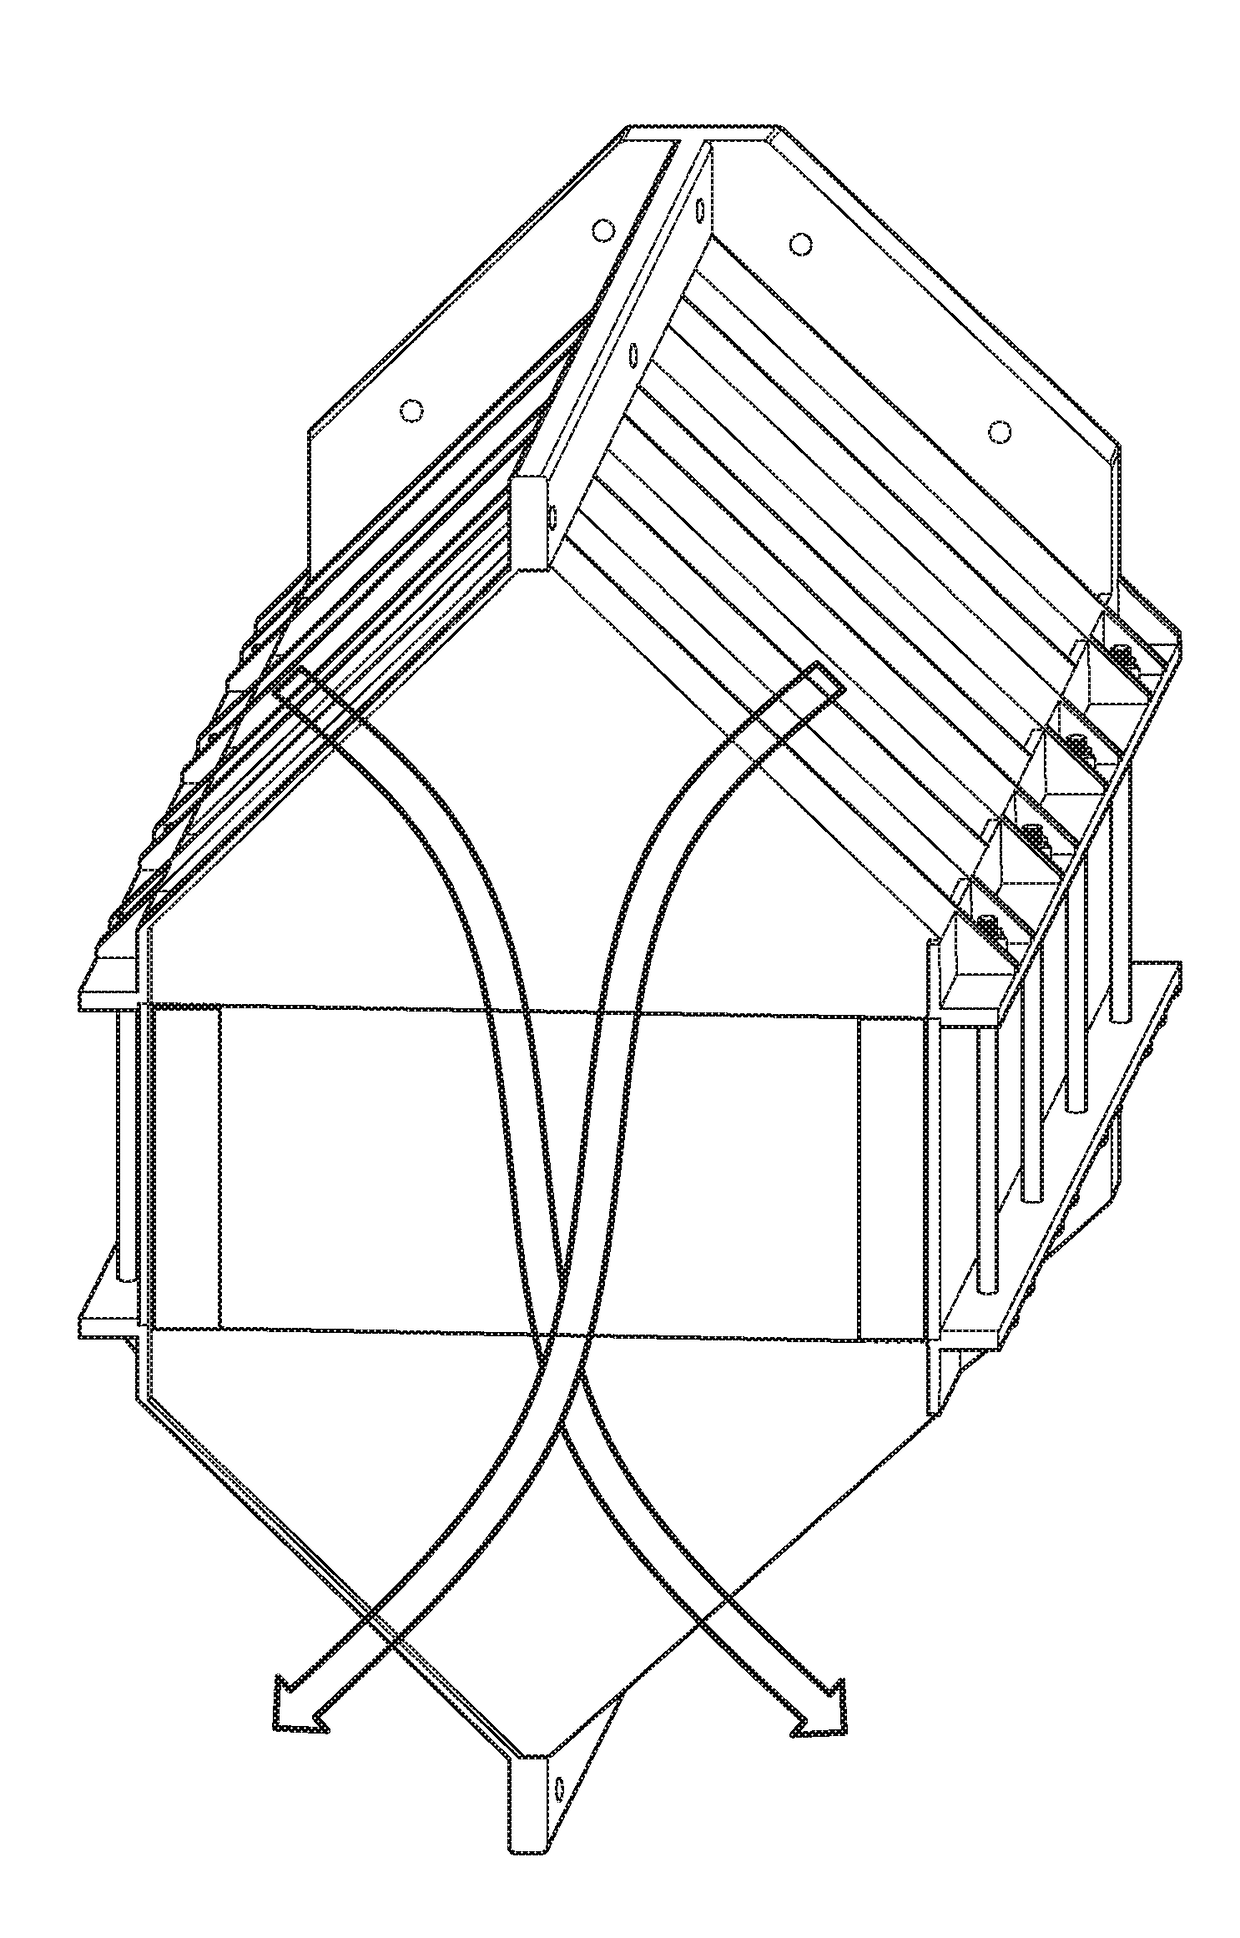 Method of producing a micro-core heat exchanger for a compact indirect evaporative cooler